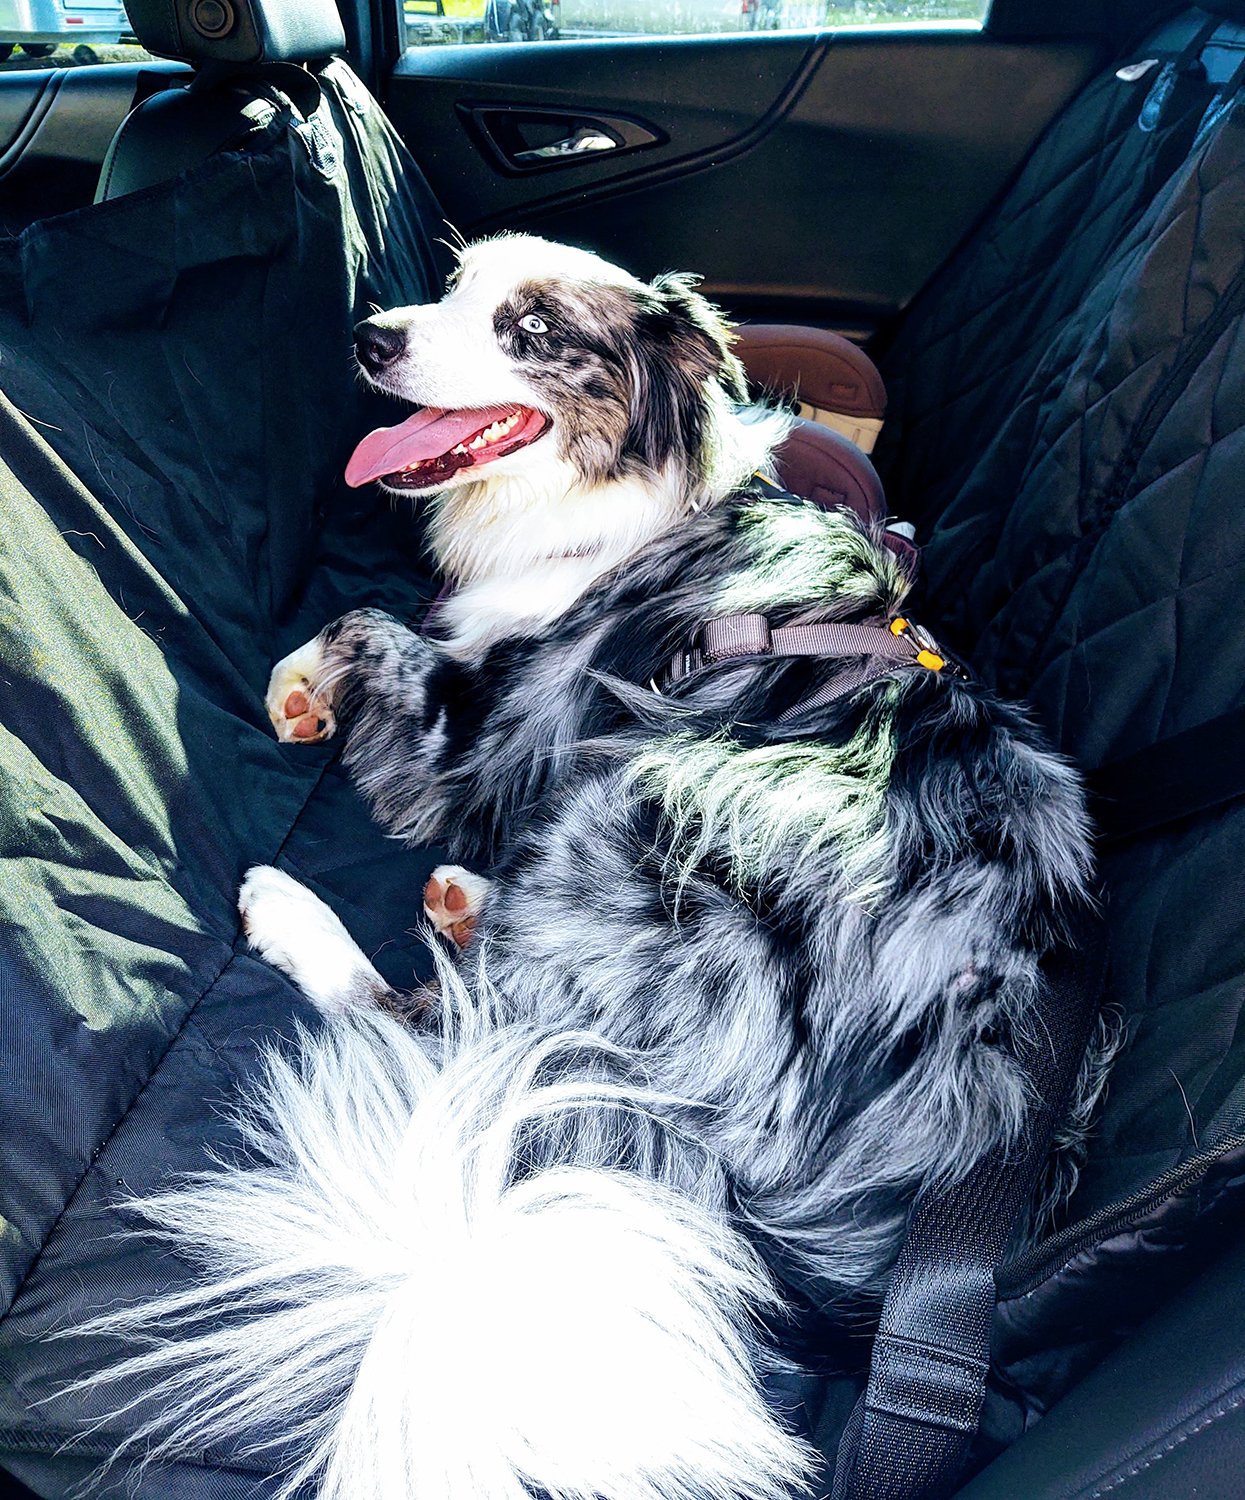 Canine "Roadtrip" Summer 2020 - What we used